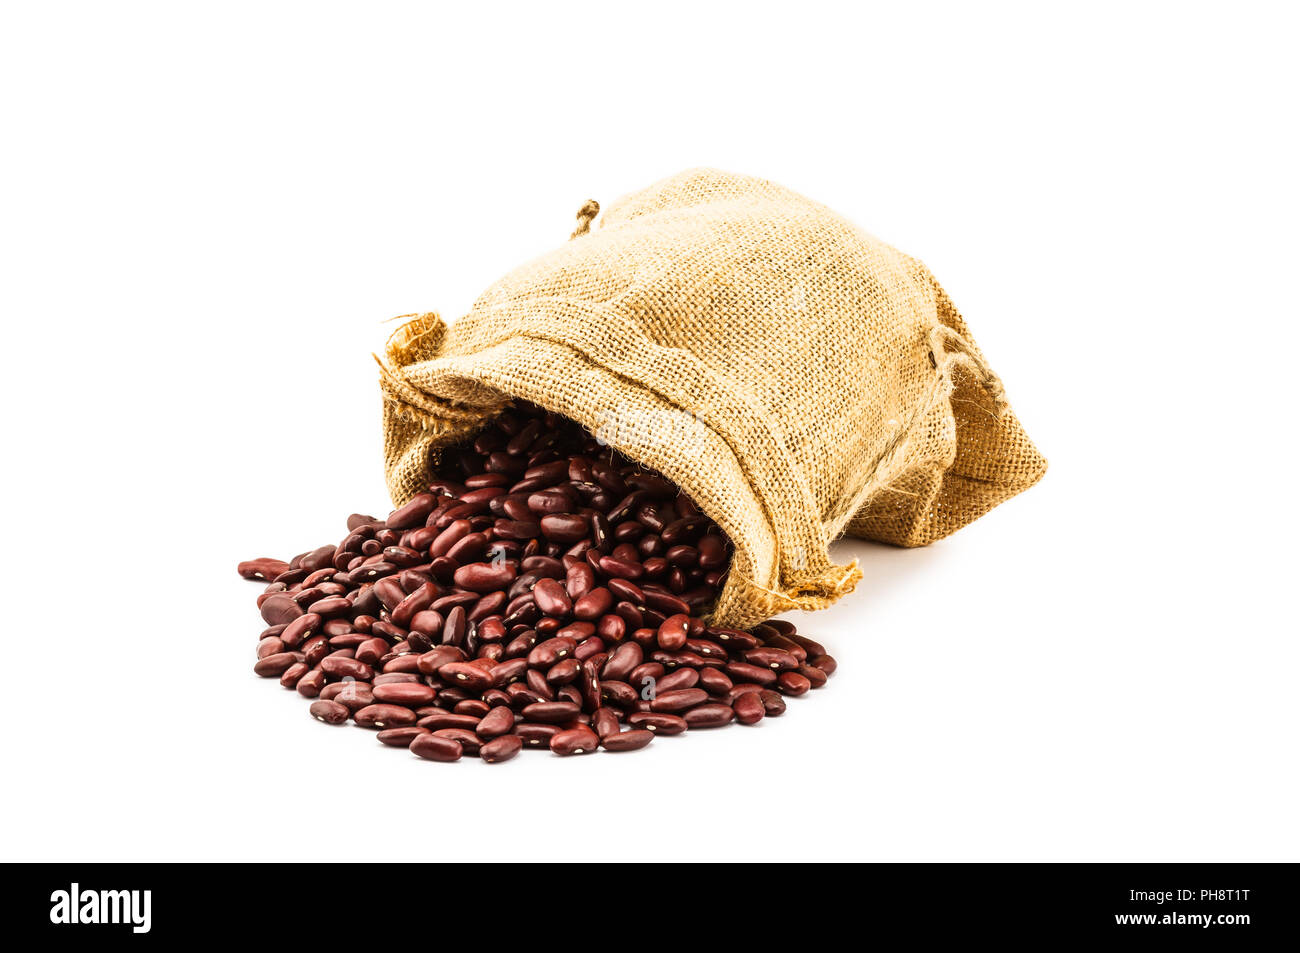 Red kidney bean in a ramie sac Stock Photo